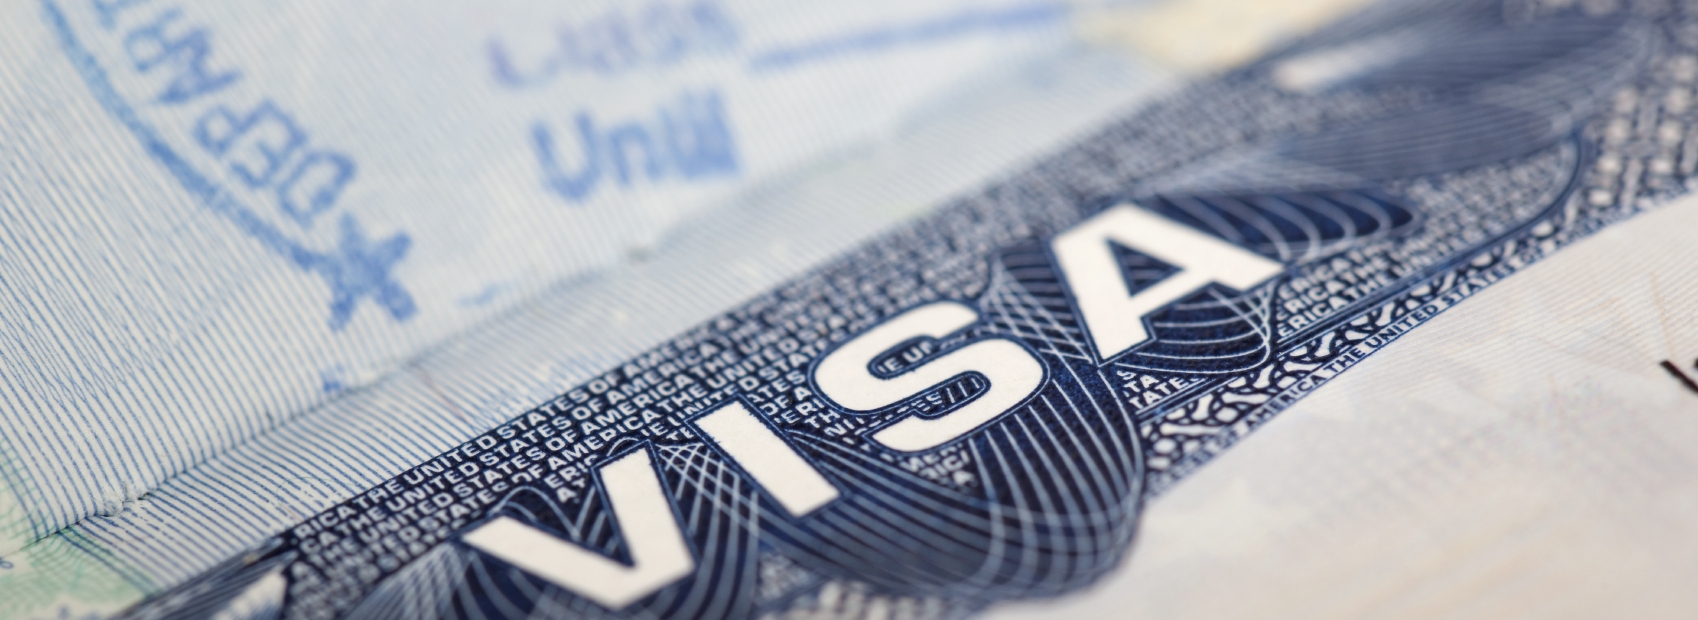 US entry visa fee to change from September 12